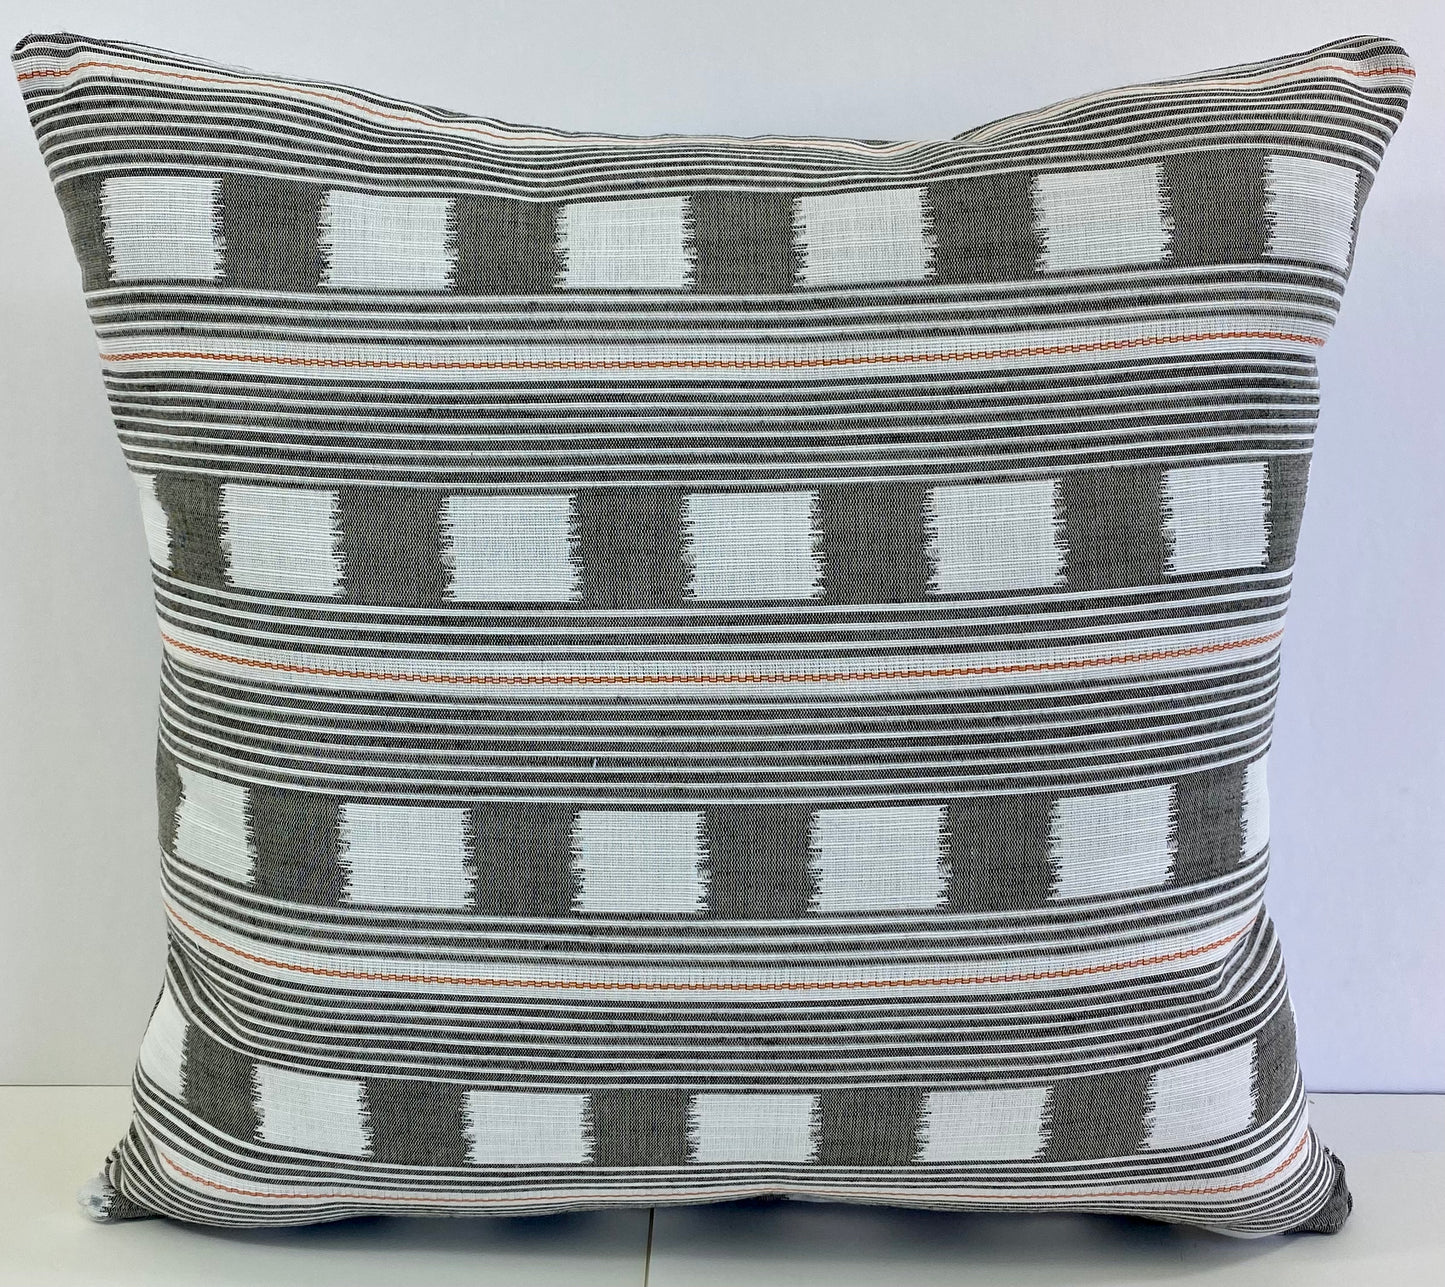 Luxury Outdoor Pillow - 22" x 22" - Barcode; Sunbrella, or equivalent, fabric and fiber fill